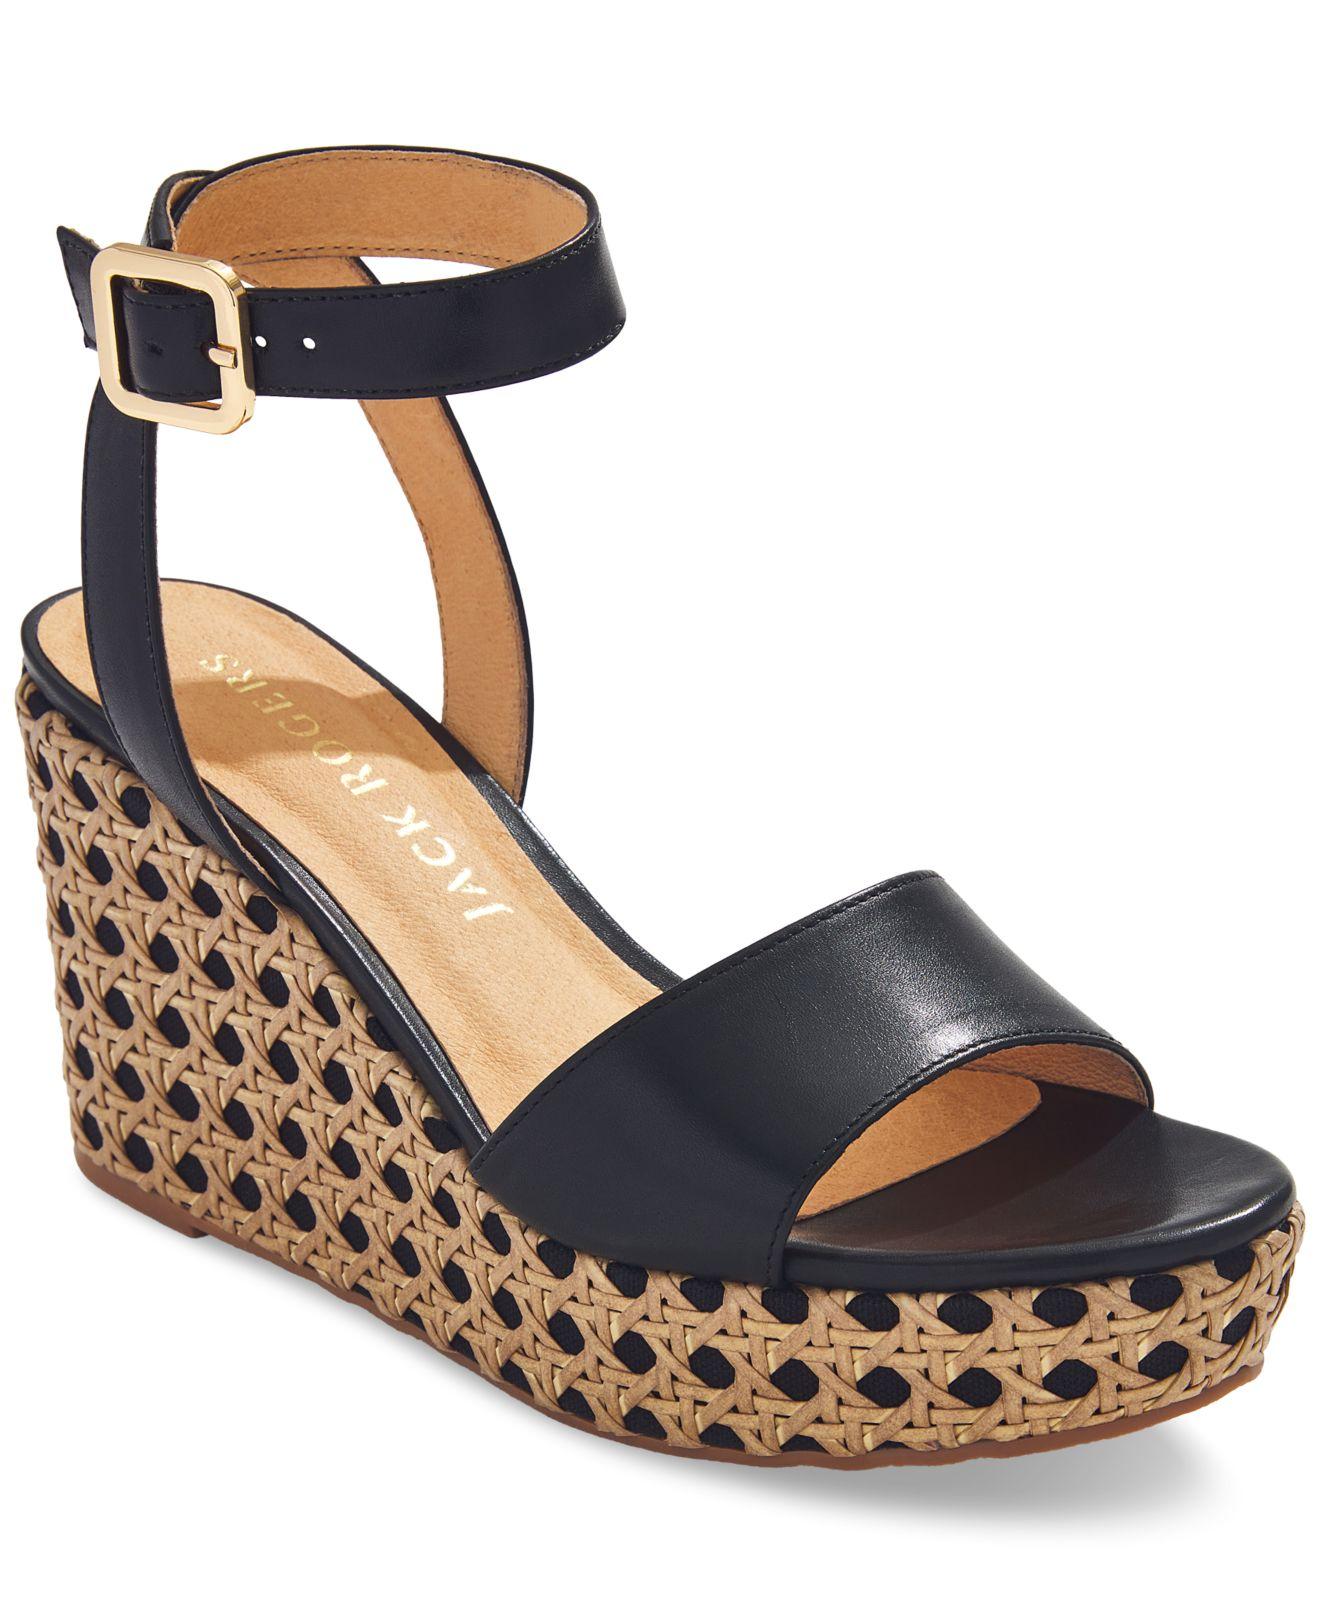 Jack Rogers Merrain Caning Espadrille Wedge Sandals in Blue | Lyst